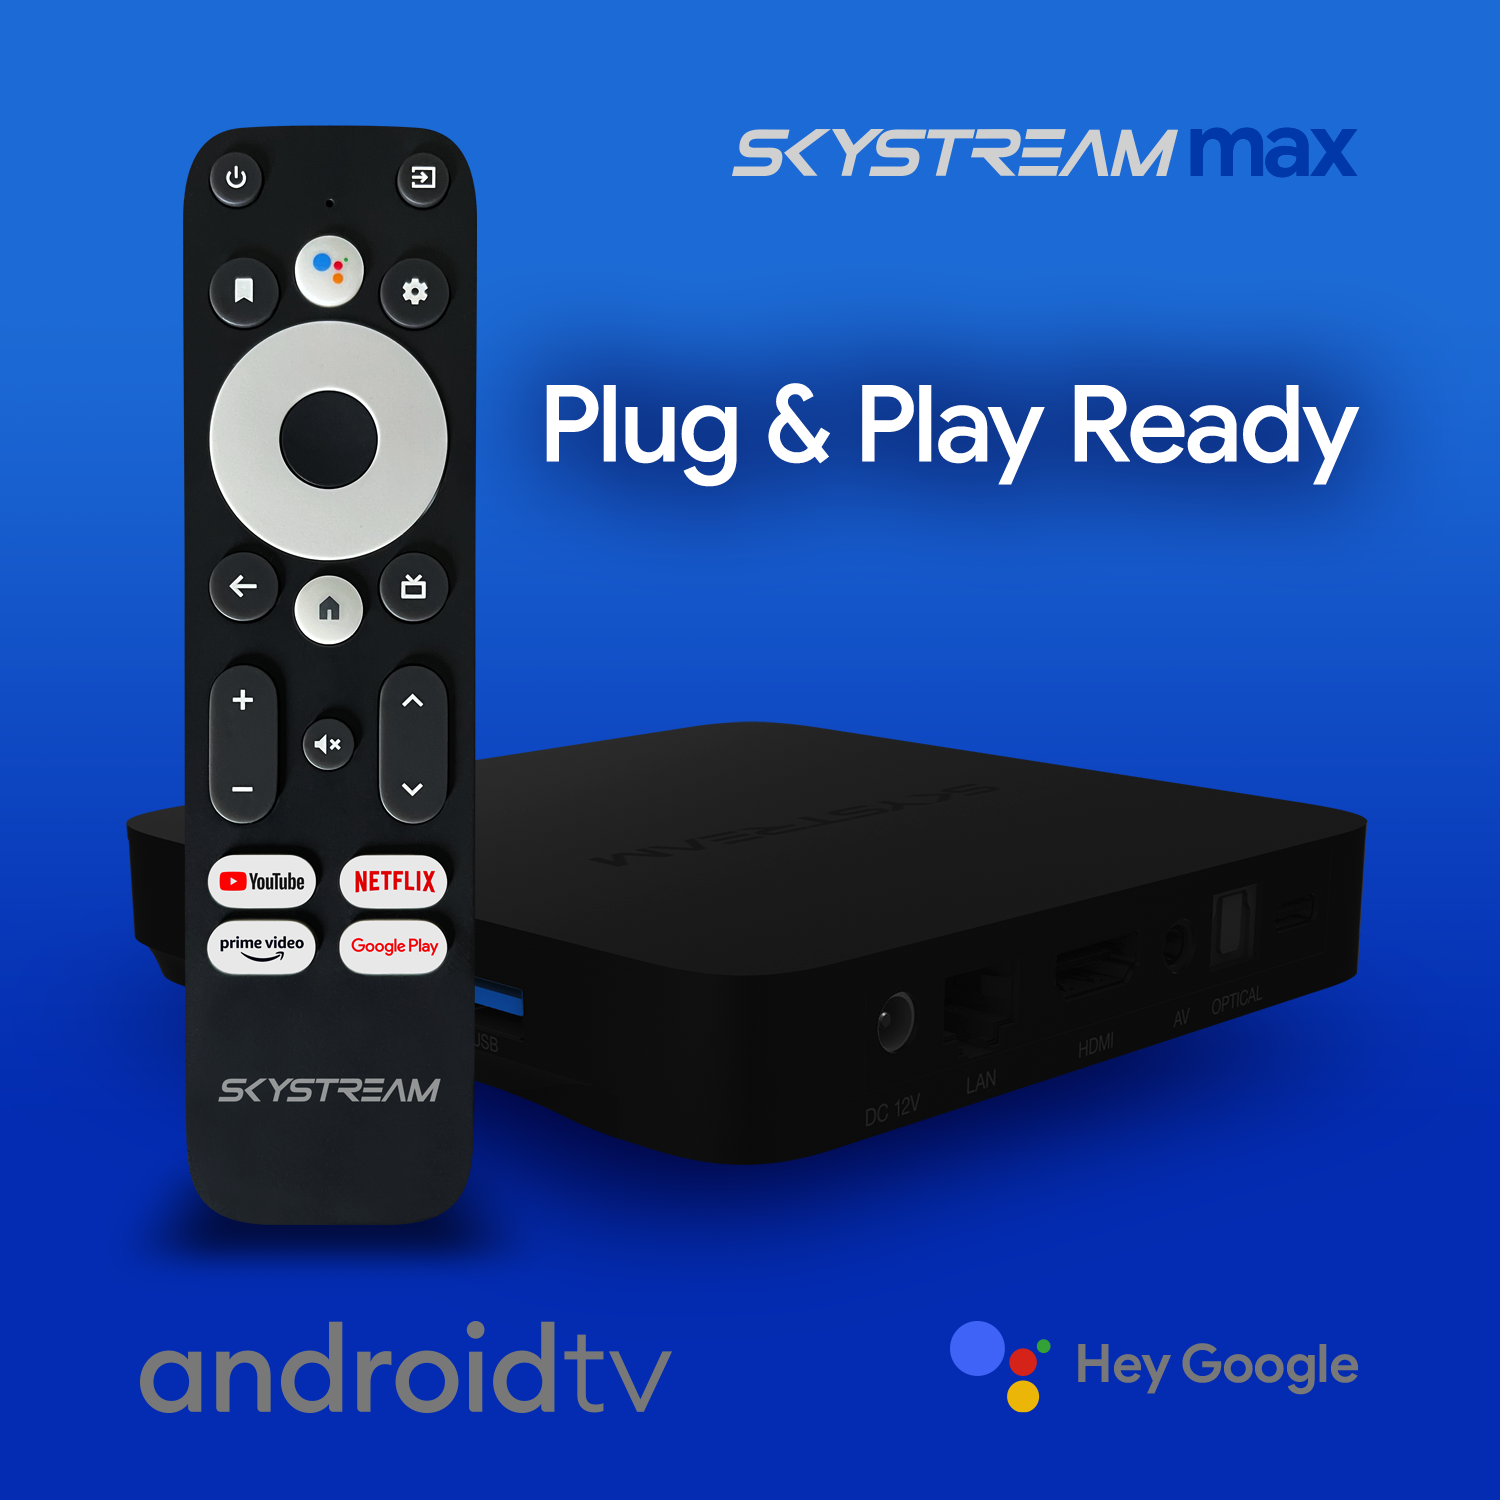 What can the new SkyStream Max | AndroidTV Streaming Media Player do?